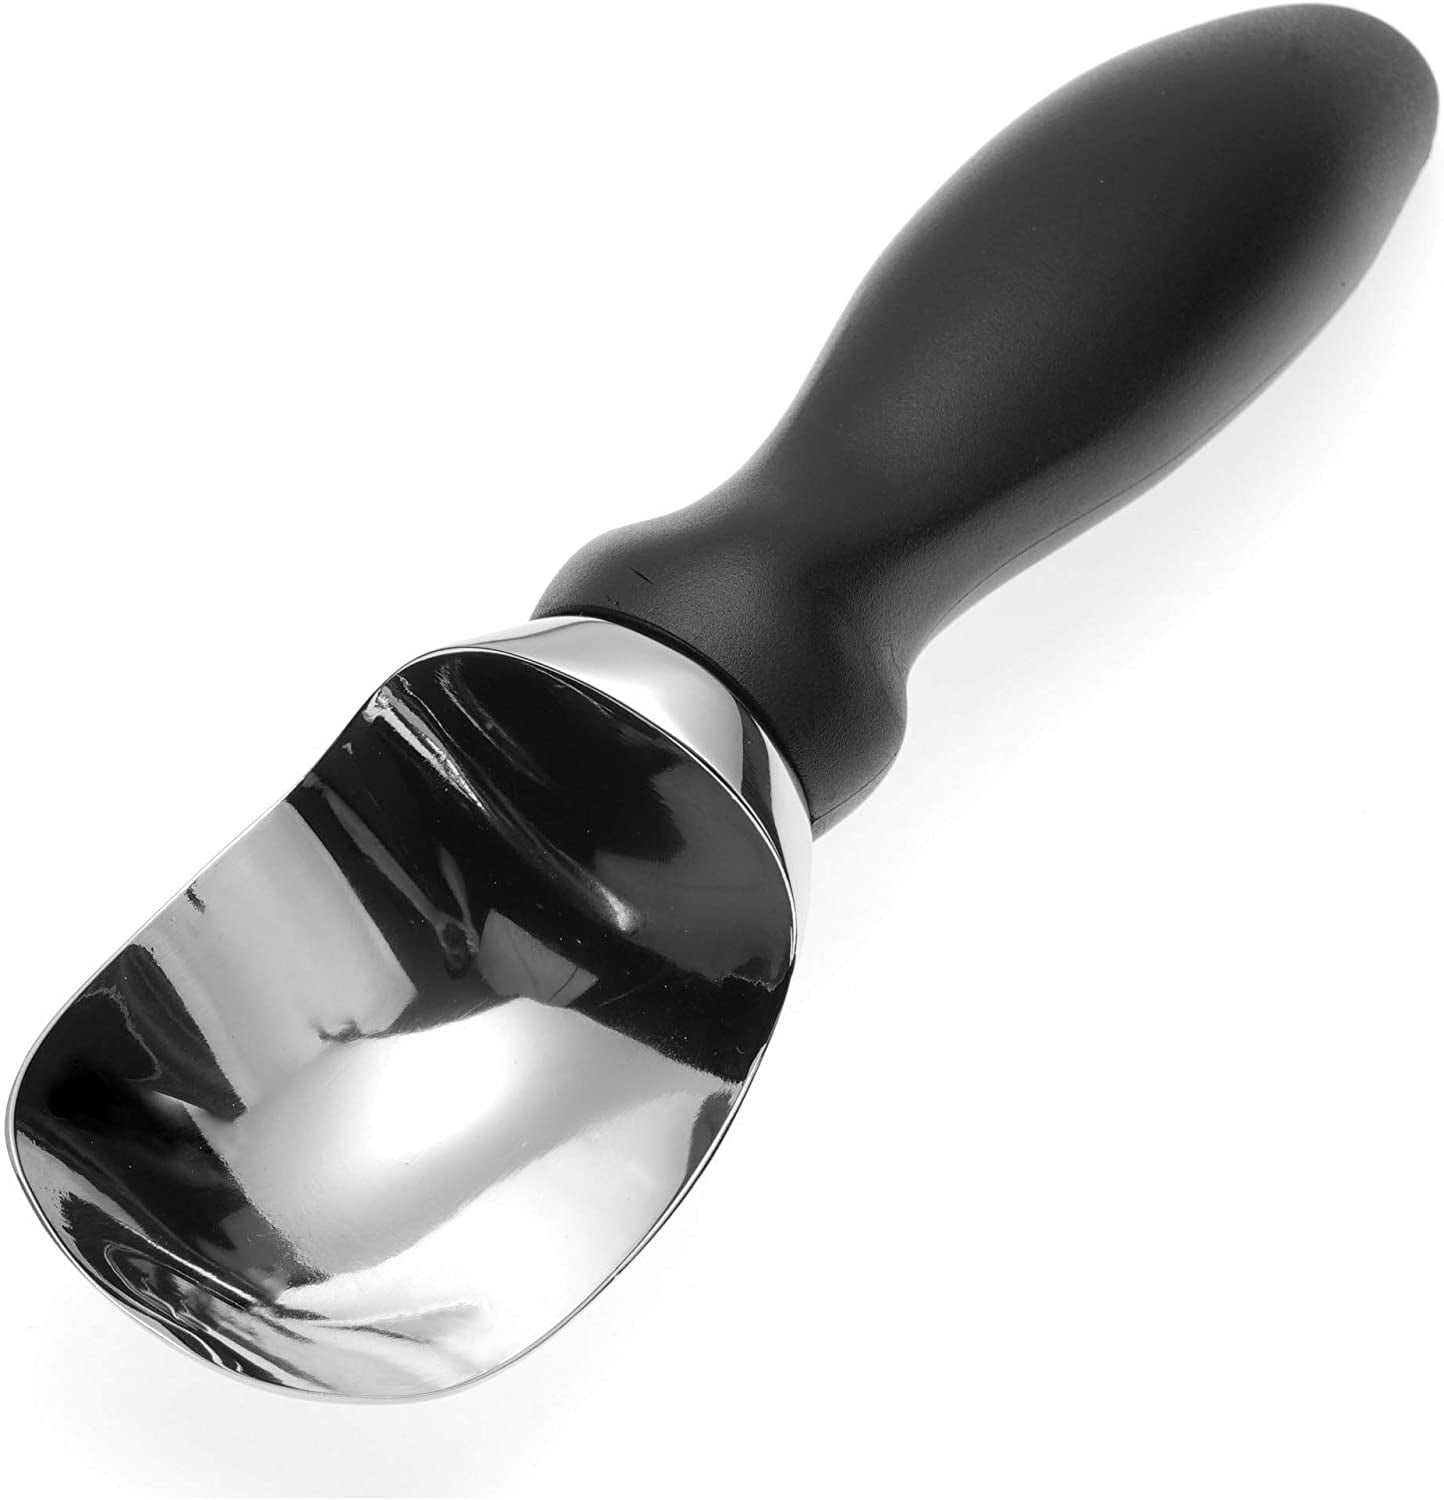 Comfy Grip 4 oz Stainless Steel #8 Ice Cream Scoop - with Gray Handle - 1  count box